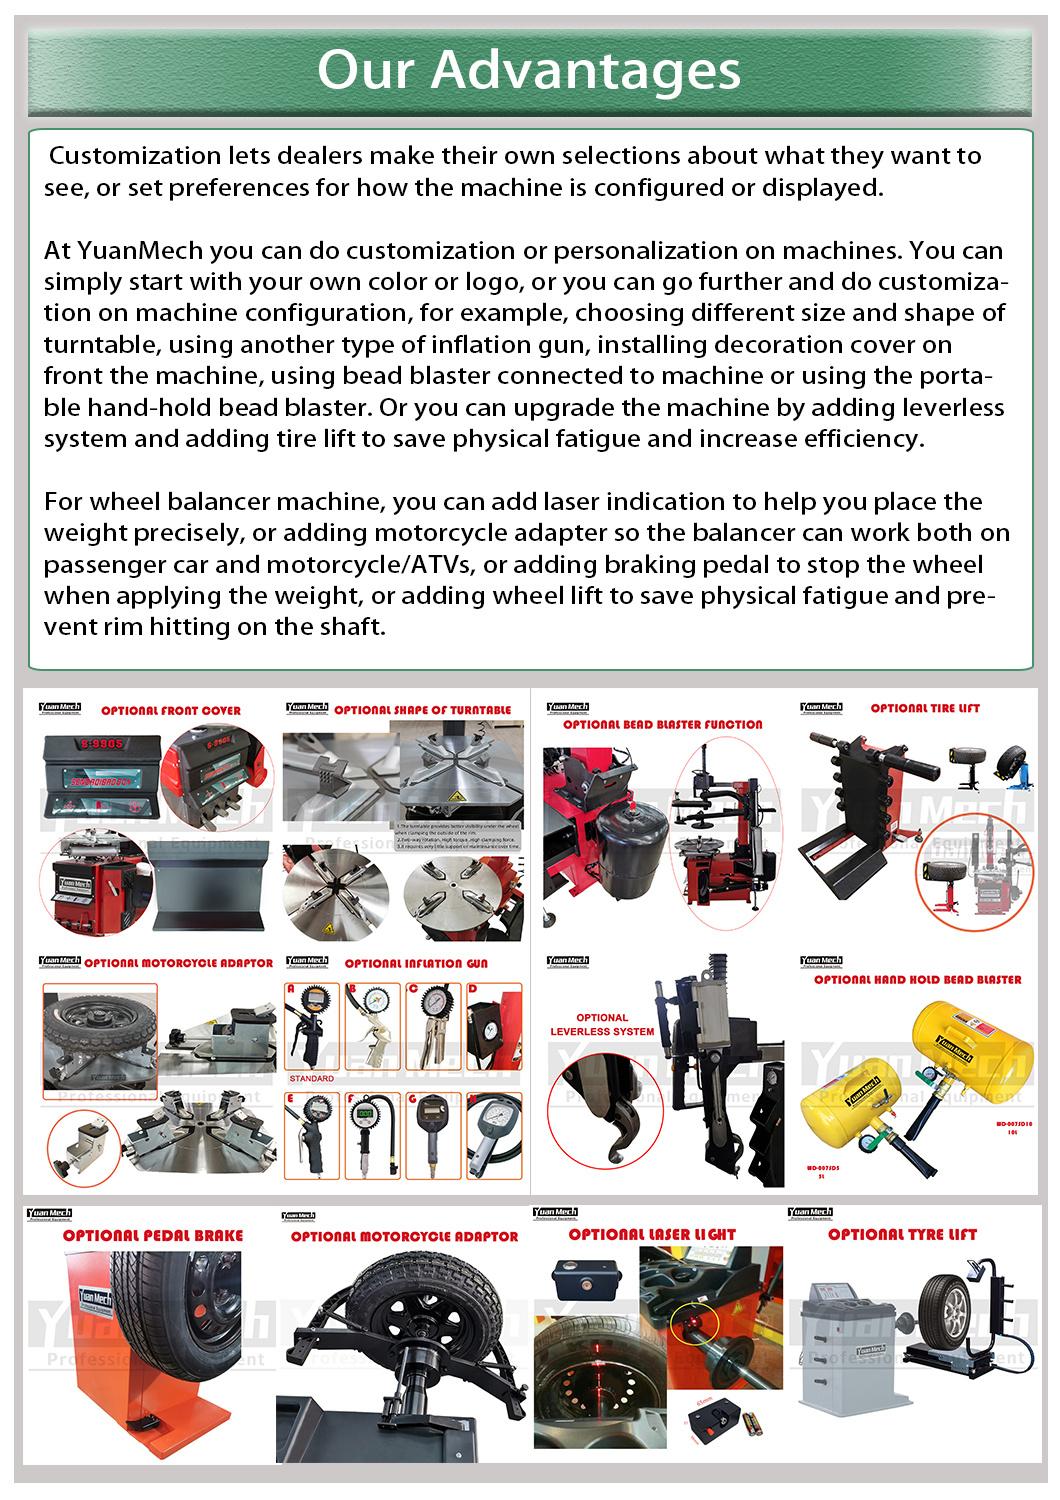 Full Automatic Auto Inspection Equipment for Wheel Balancer